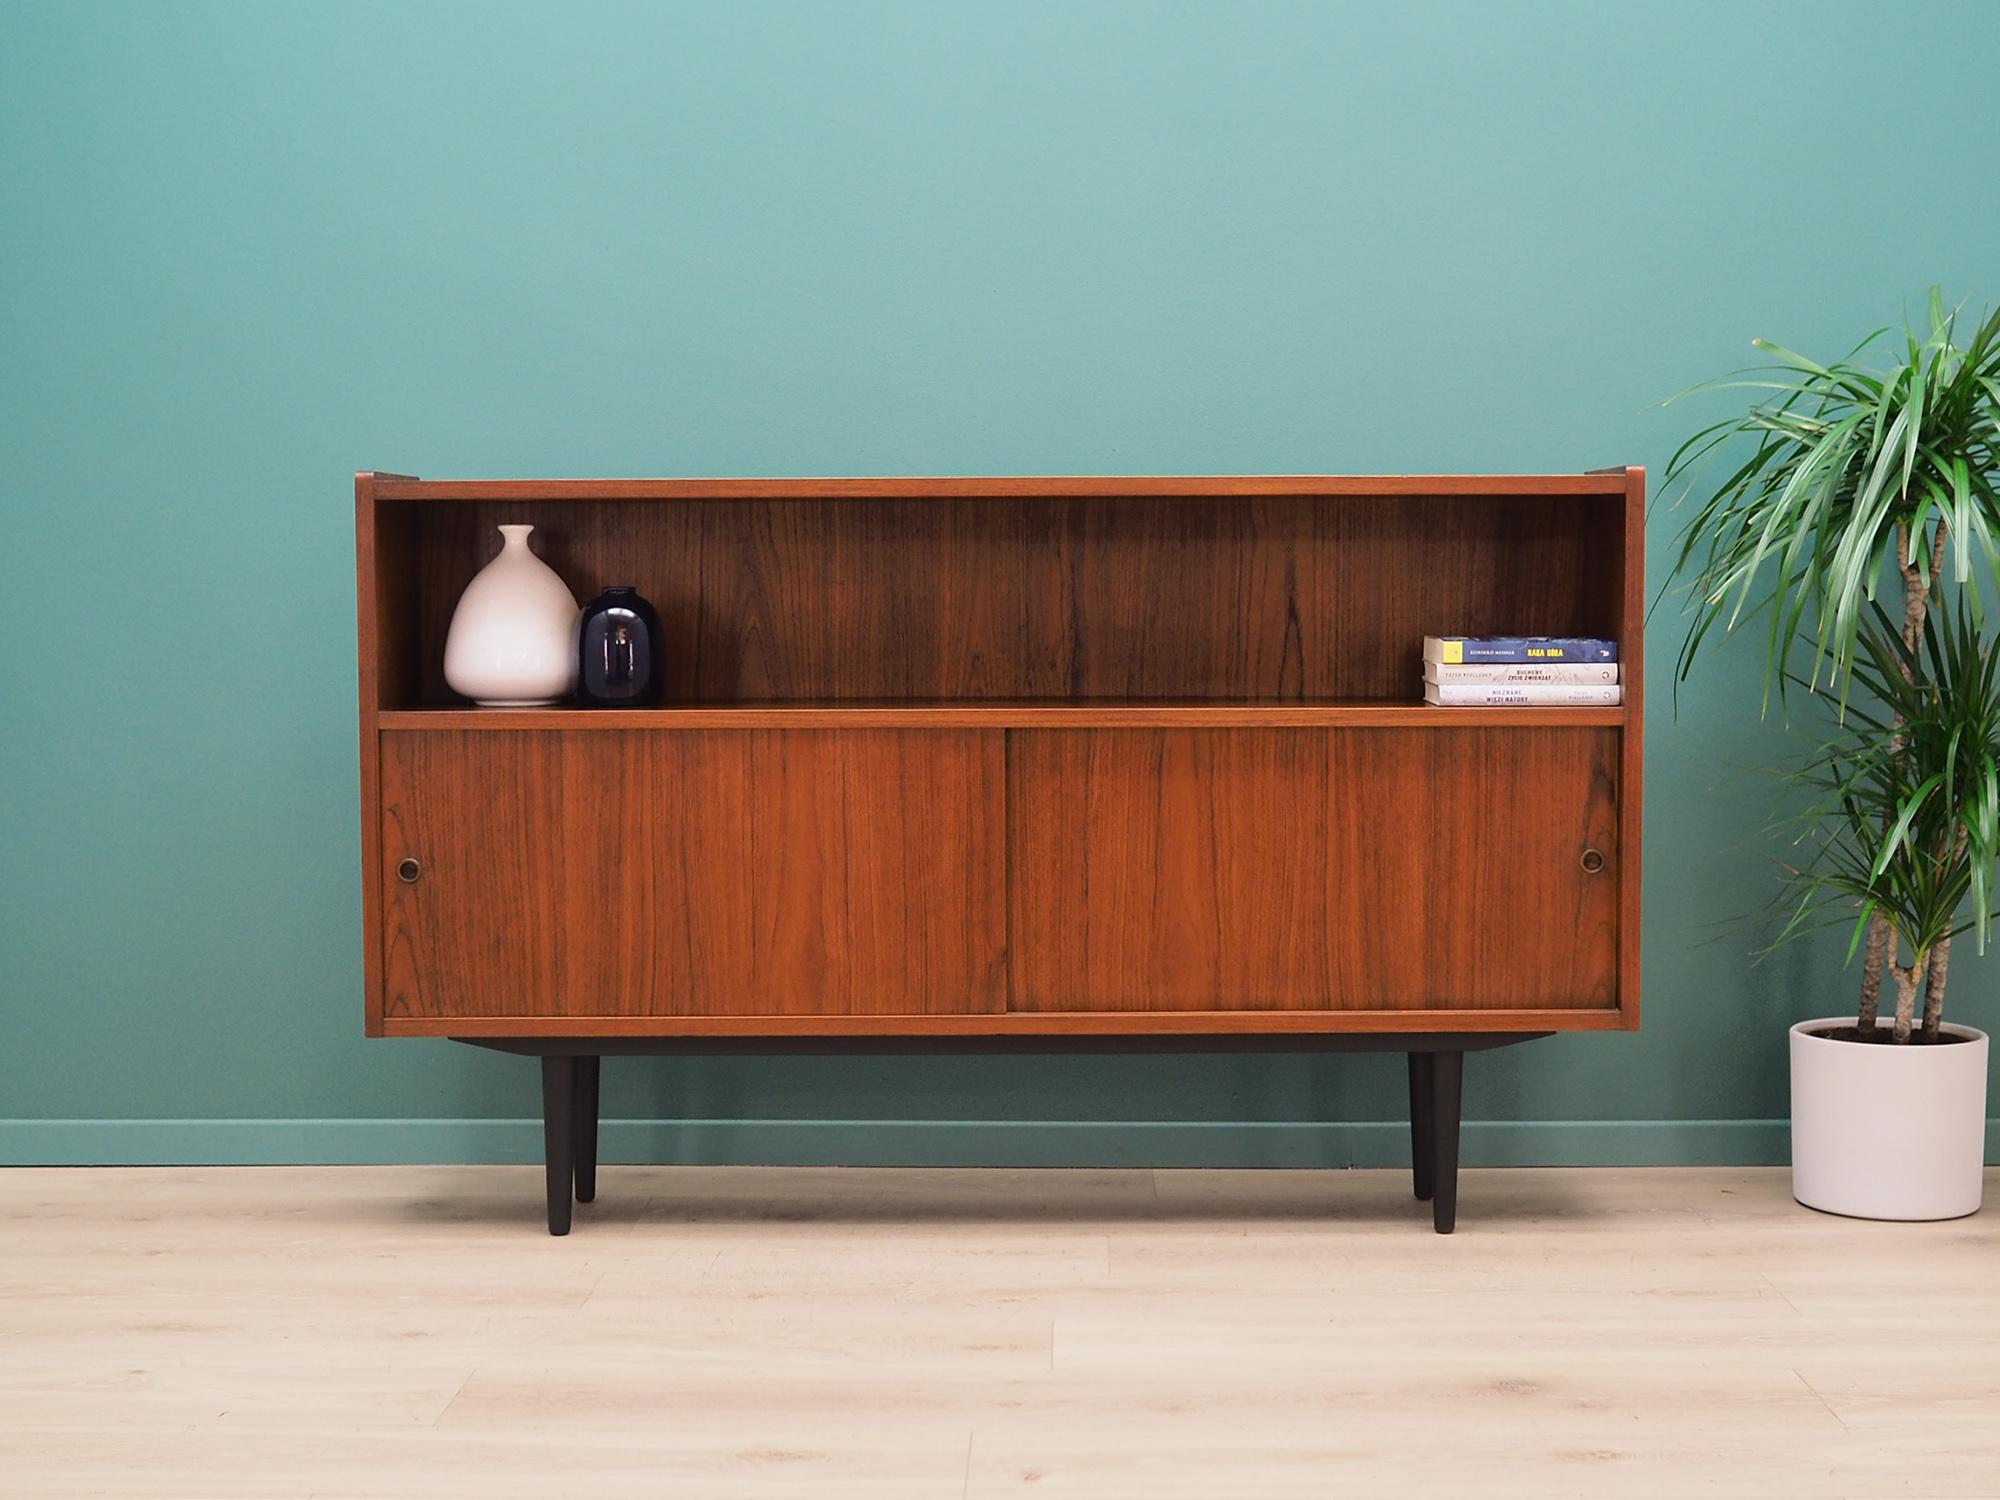 Sideboard was made in the 1970s, Danish production.

The structure is covered with teak veneer. Legs made of solid wood stained black. Surface after refreshing. Inside the space has been filled with a practical shelf with no height adjustment. The